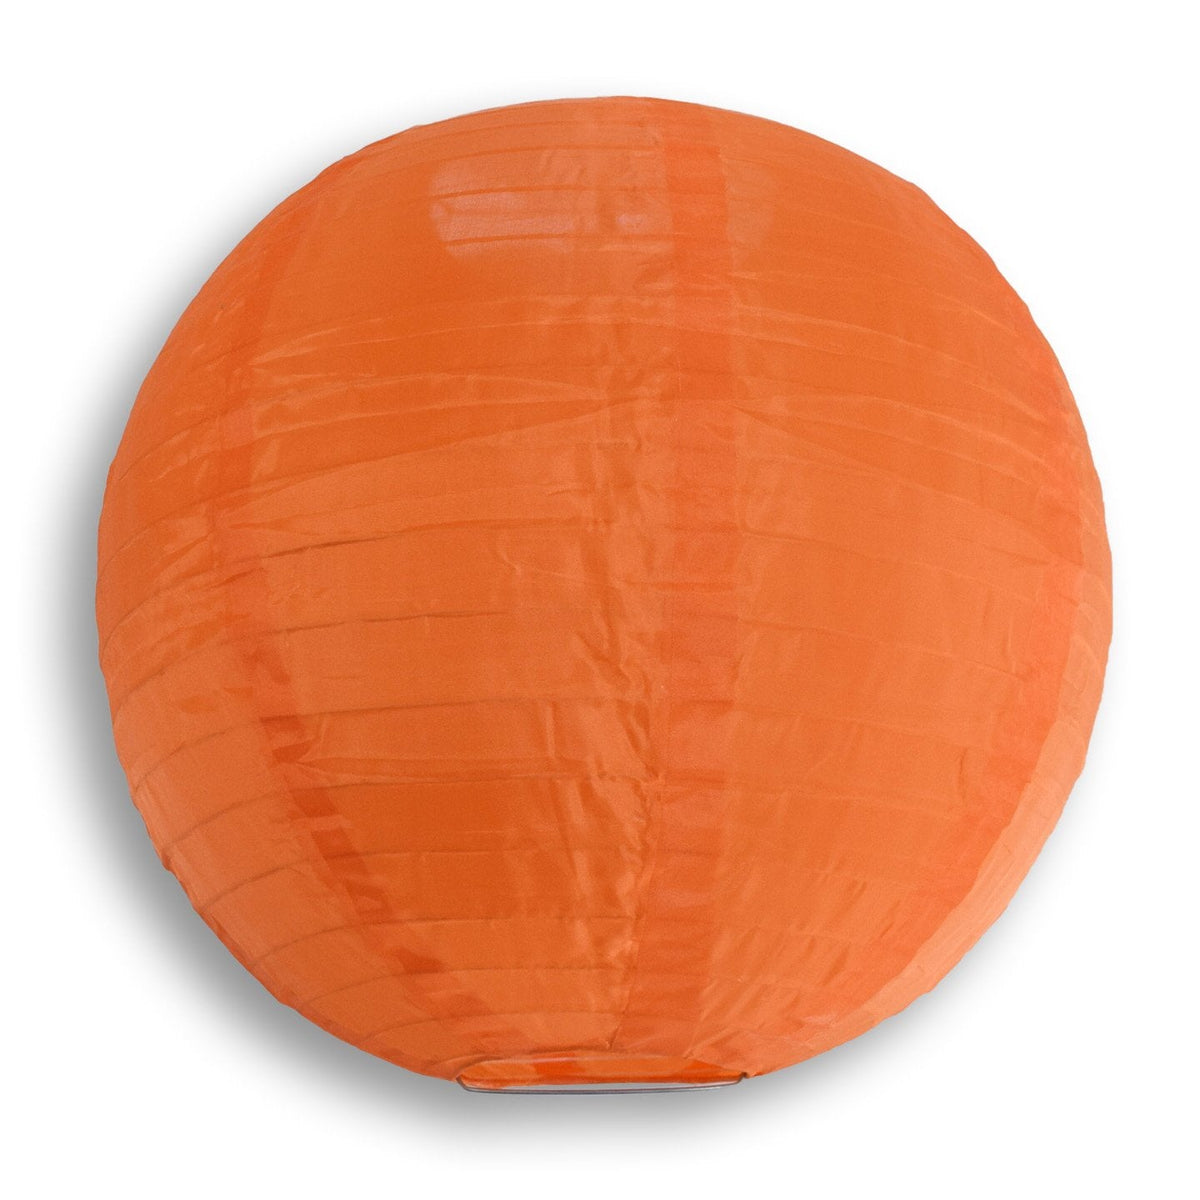 20" Shimmering Even Ribbing Nylon Lanterns - Door-2-Door - Various Colors Available (Master Case, 60-Day Processing)